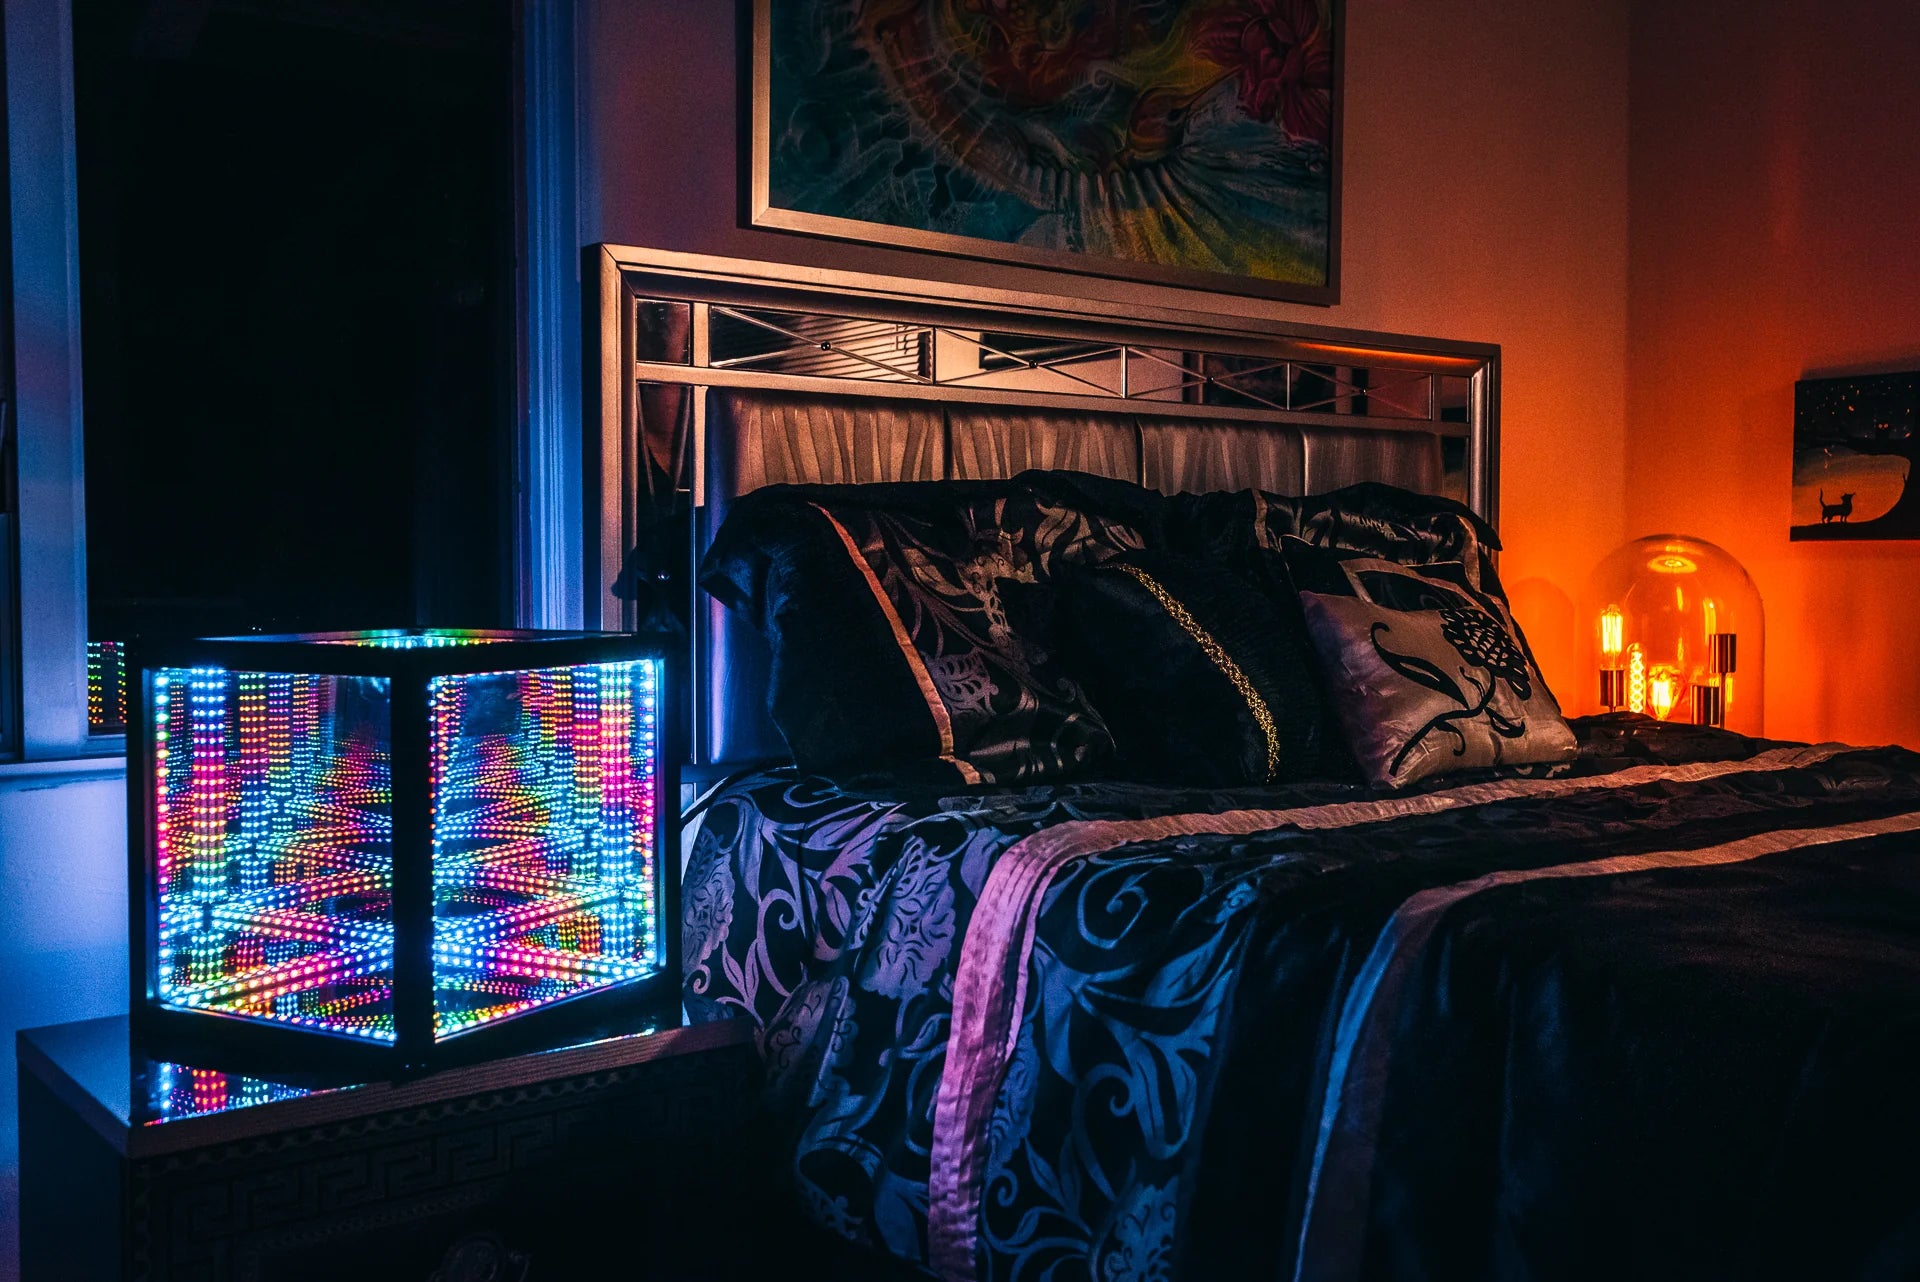 A bed in a room with a colorful bedside lamp, adorned with the best christmas lights.